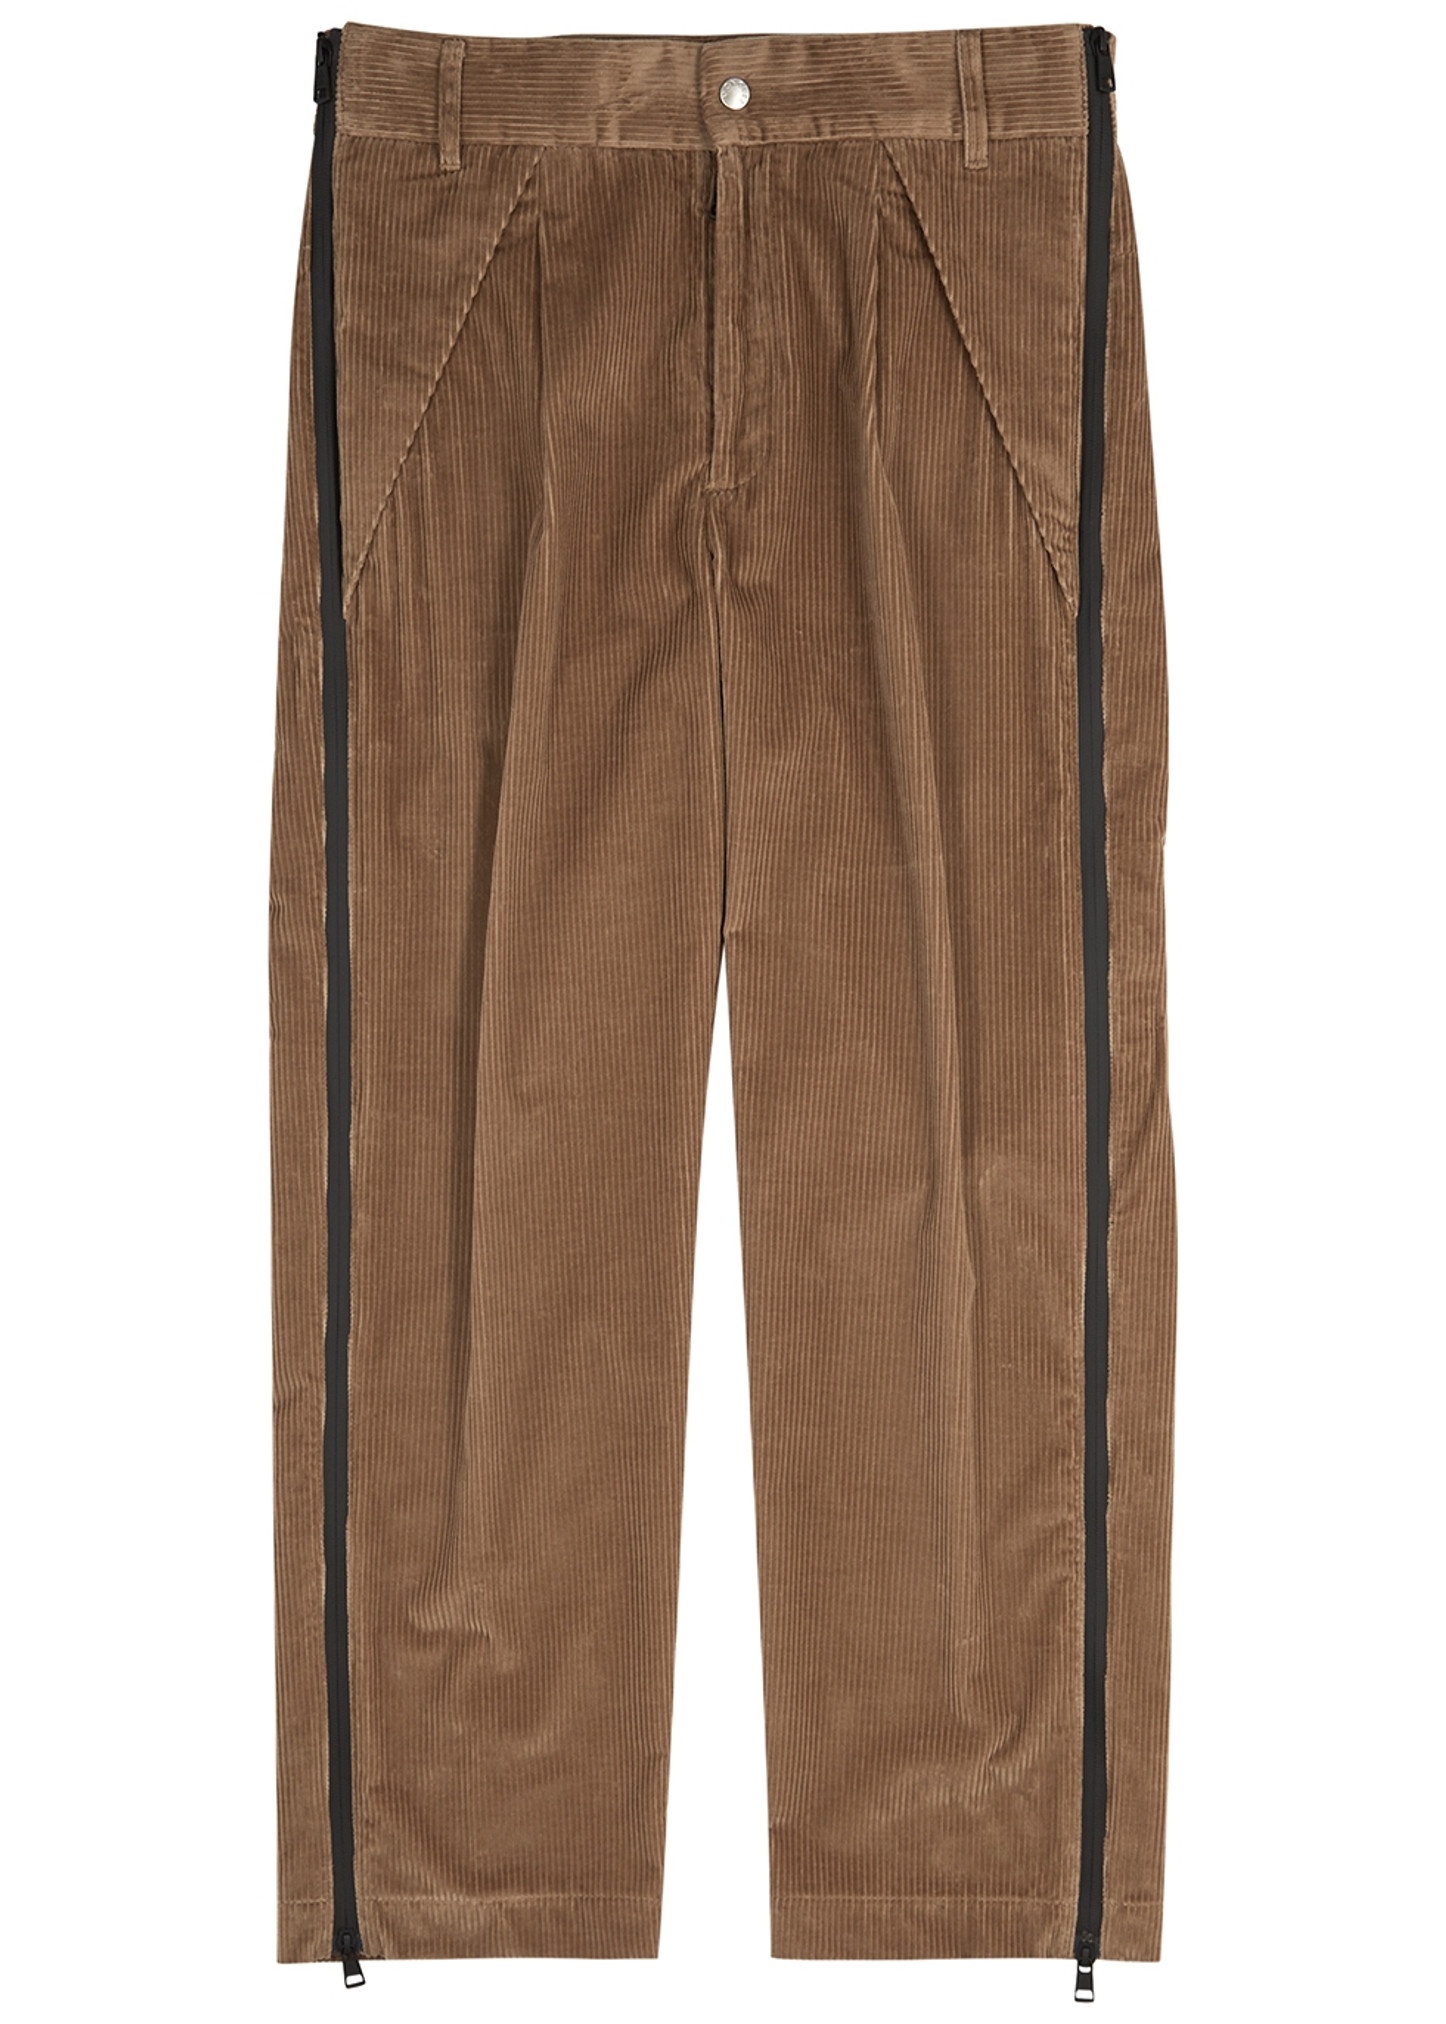 8 Moncler Palm Angels brown corduroy trousers - 1